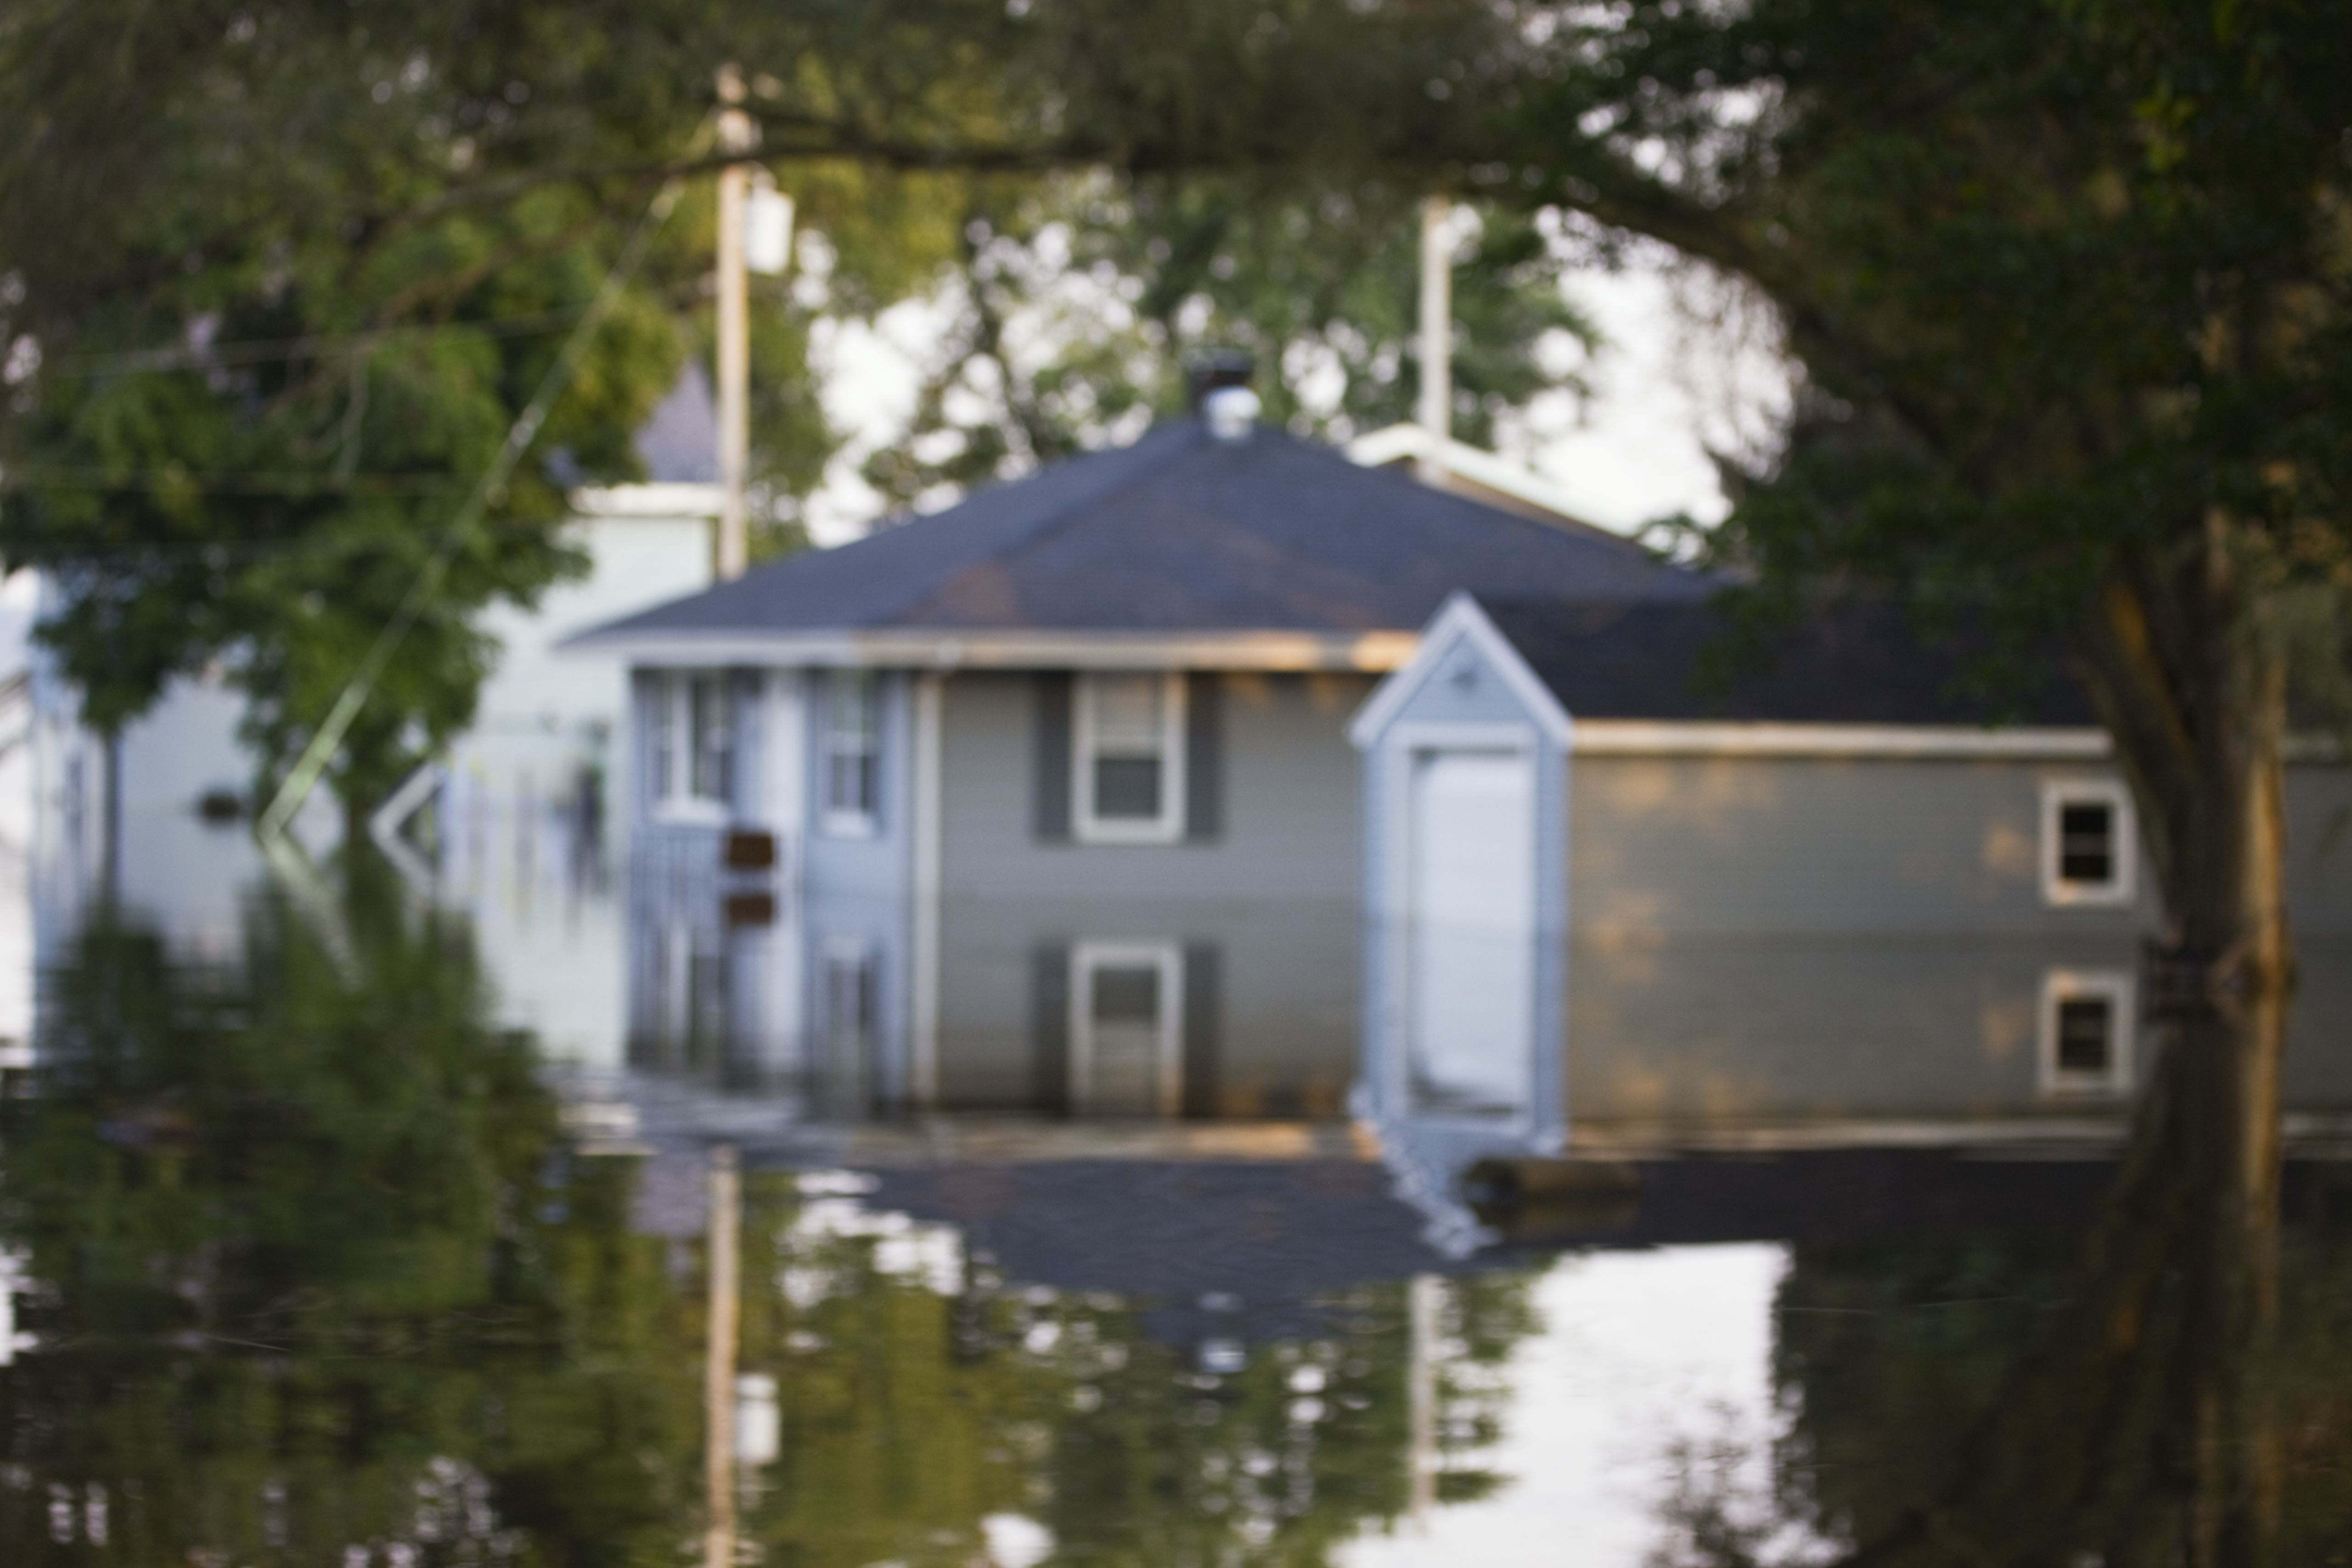 Where To Get Insurance If You Live In A Floodplain